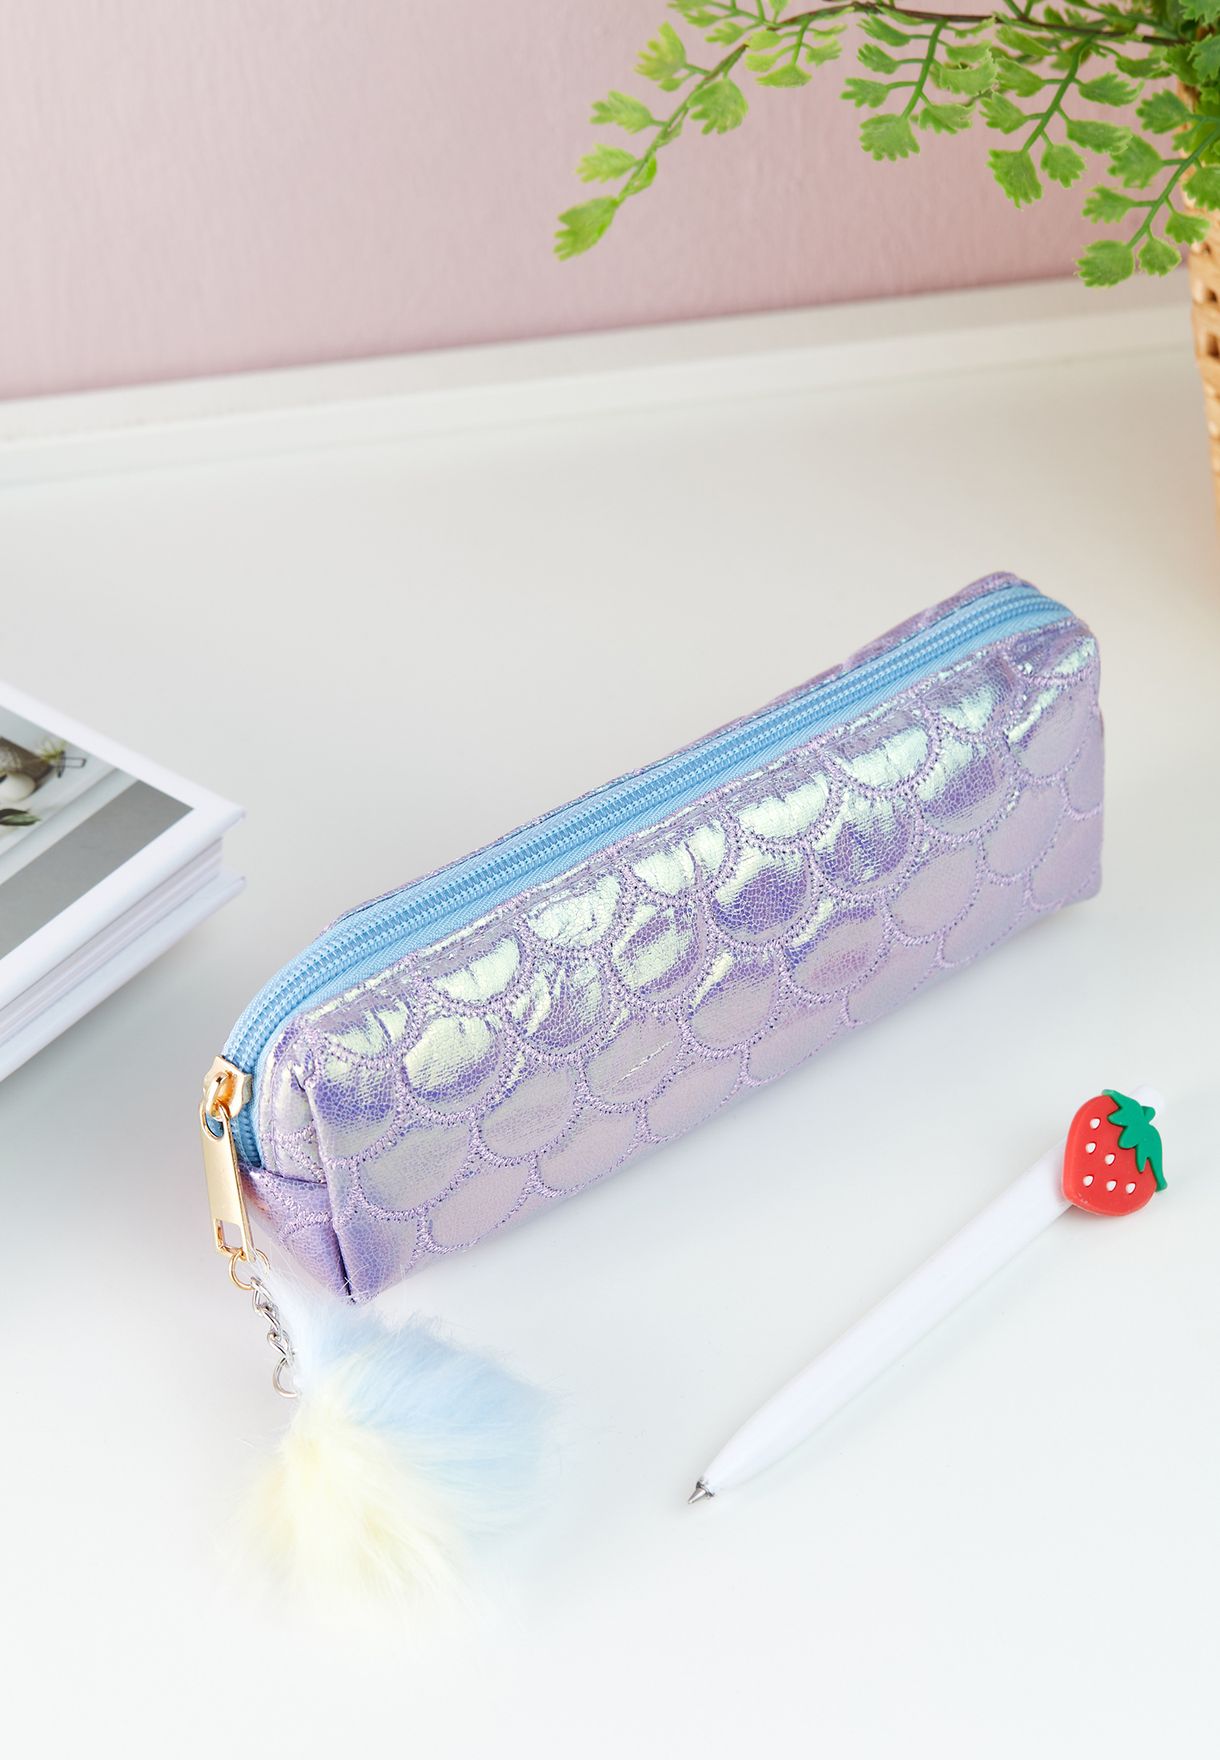 Quilted Mermaid Pencil Case